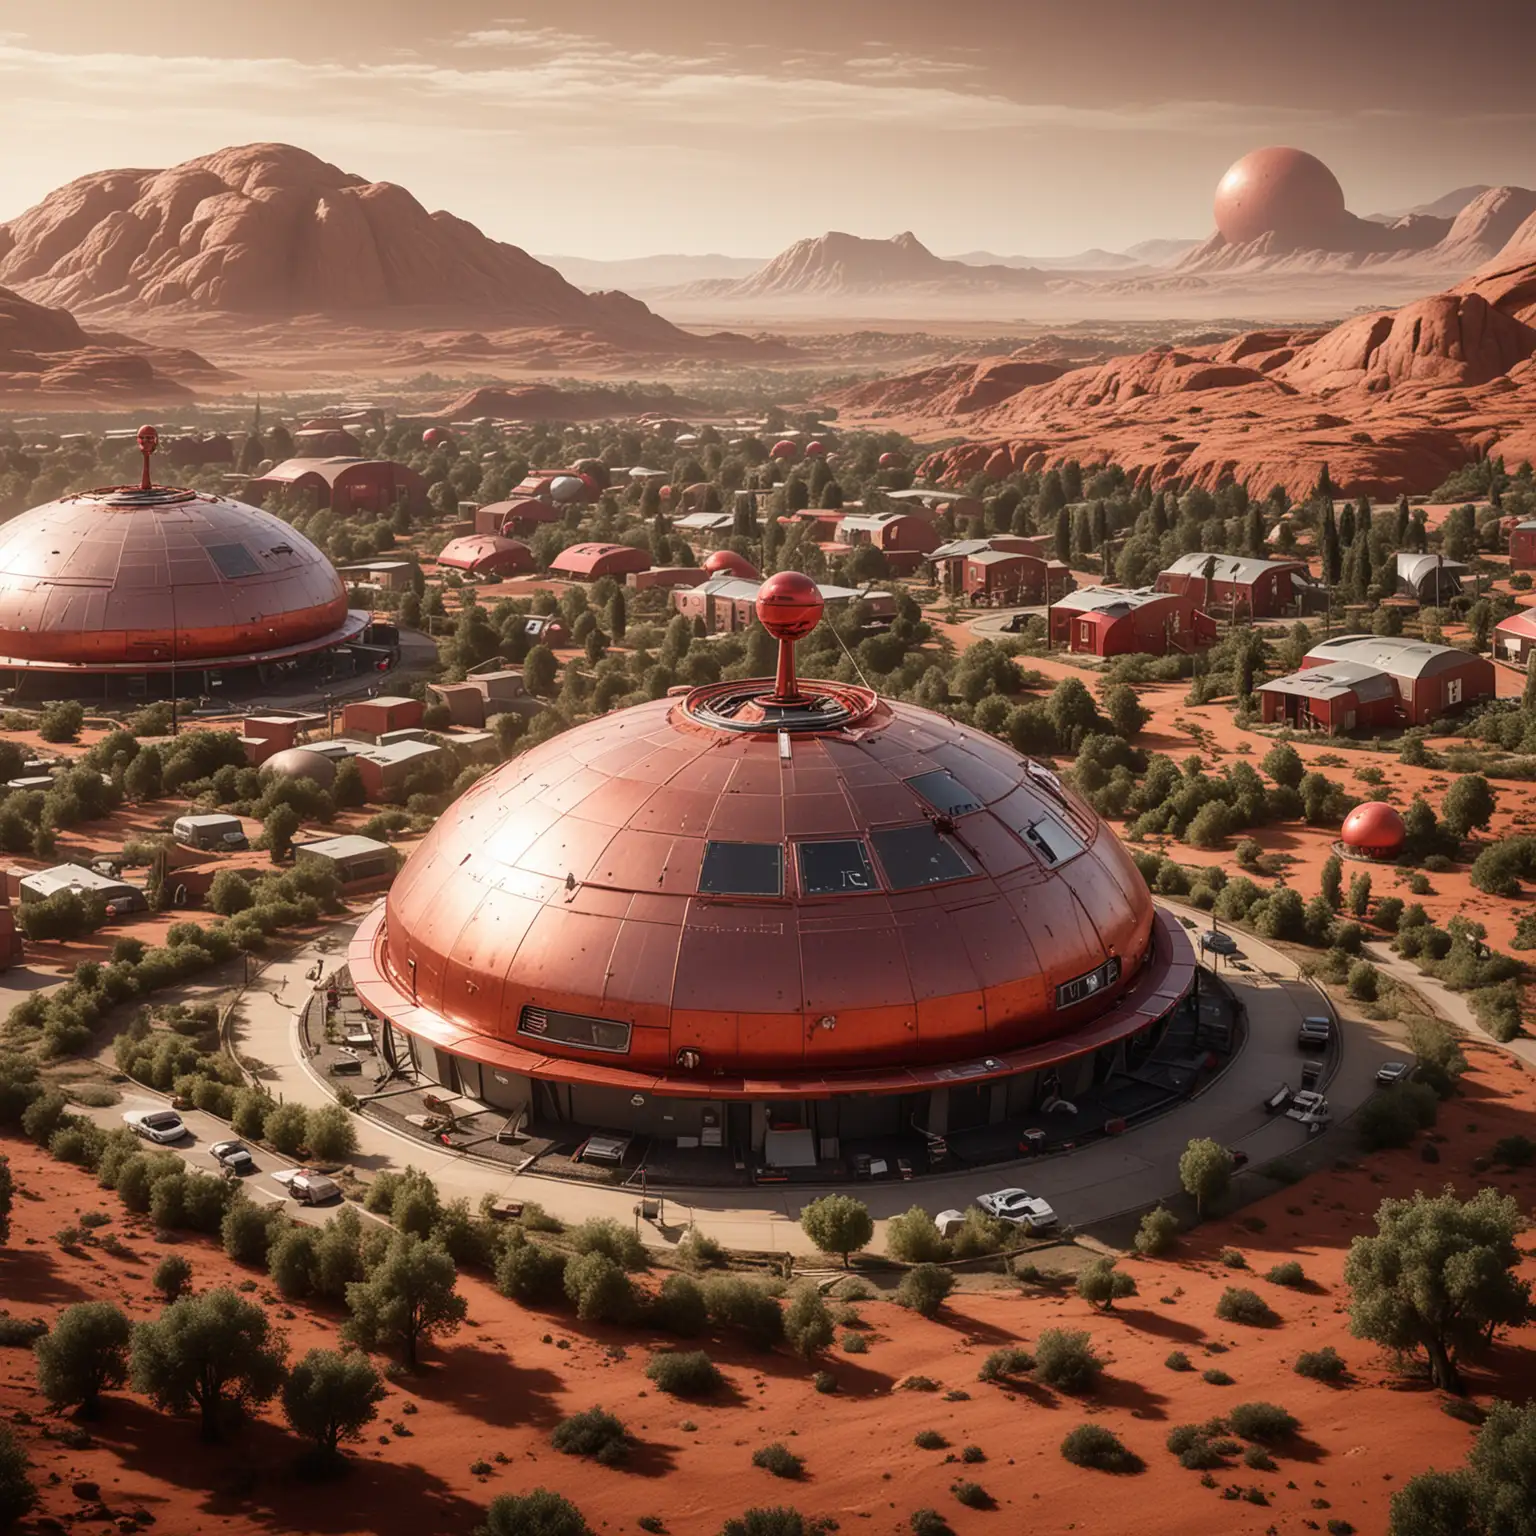 images depicting the exterior of a Martian 'surrender station' located in a suburb. The structure is a high-tech dome made of bronze and red materials, featuring a prominent dish antenna, set within a suburban landscape. Its design contrasts with the surrounding houses, adding an eerie presence to the typical suburban setting. There is a lot of greenary surrounding the area
